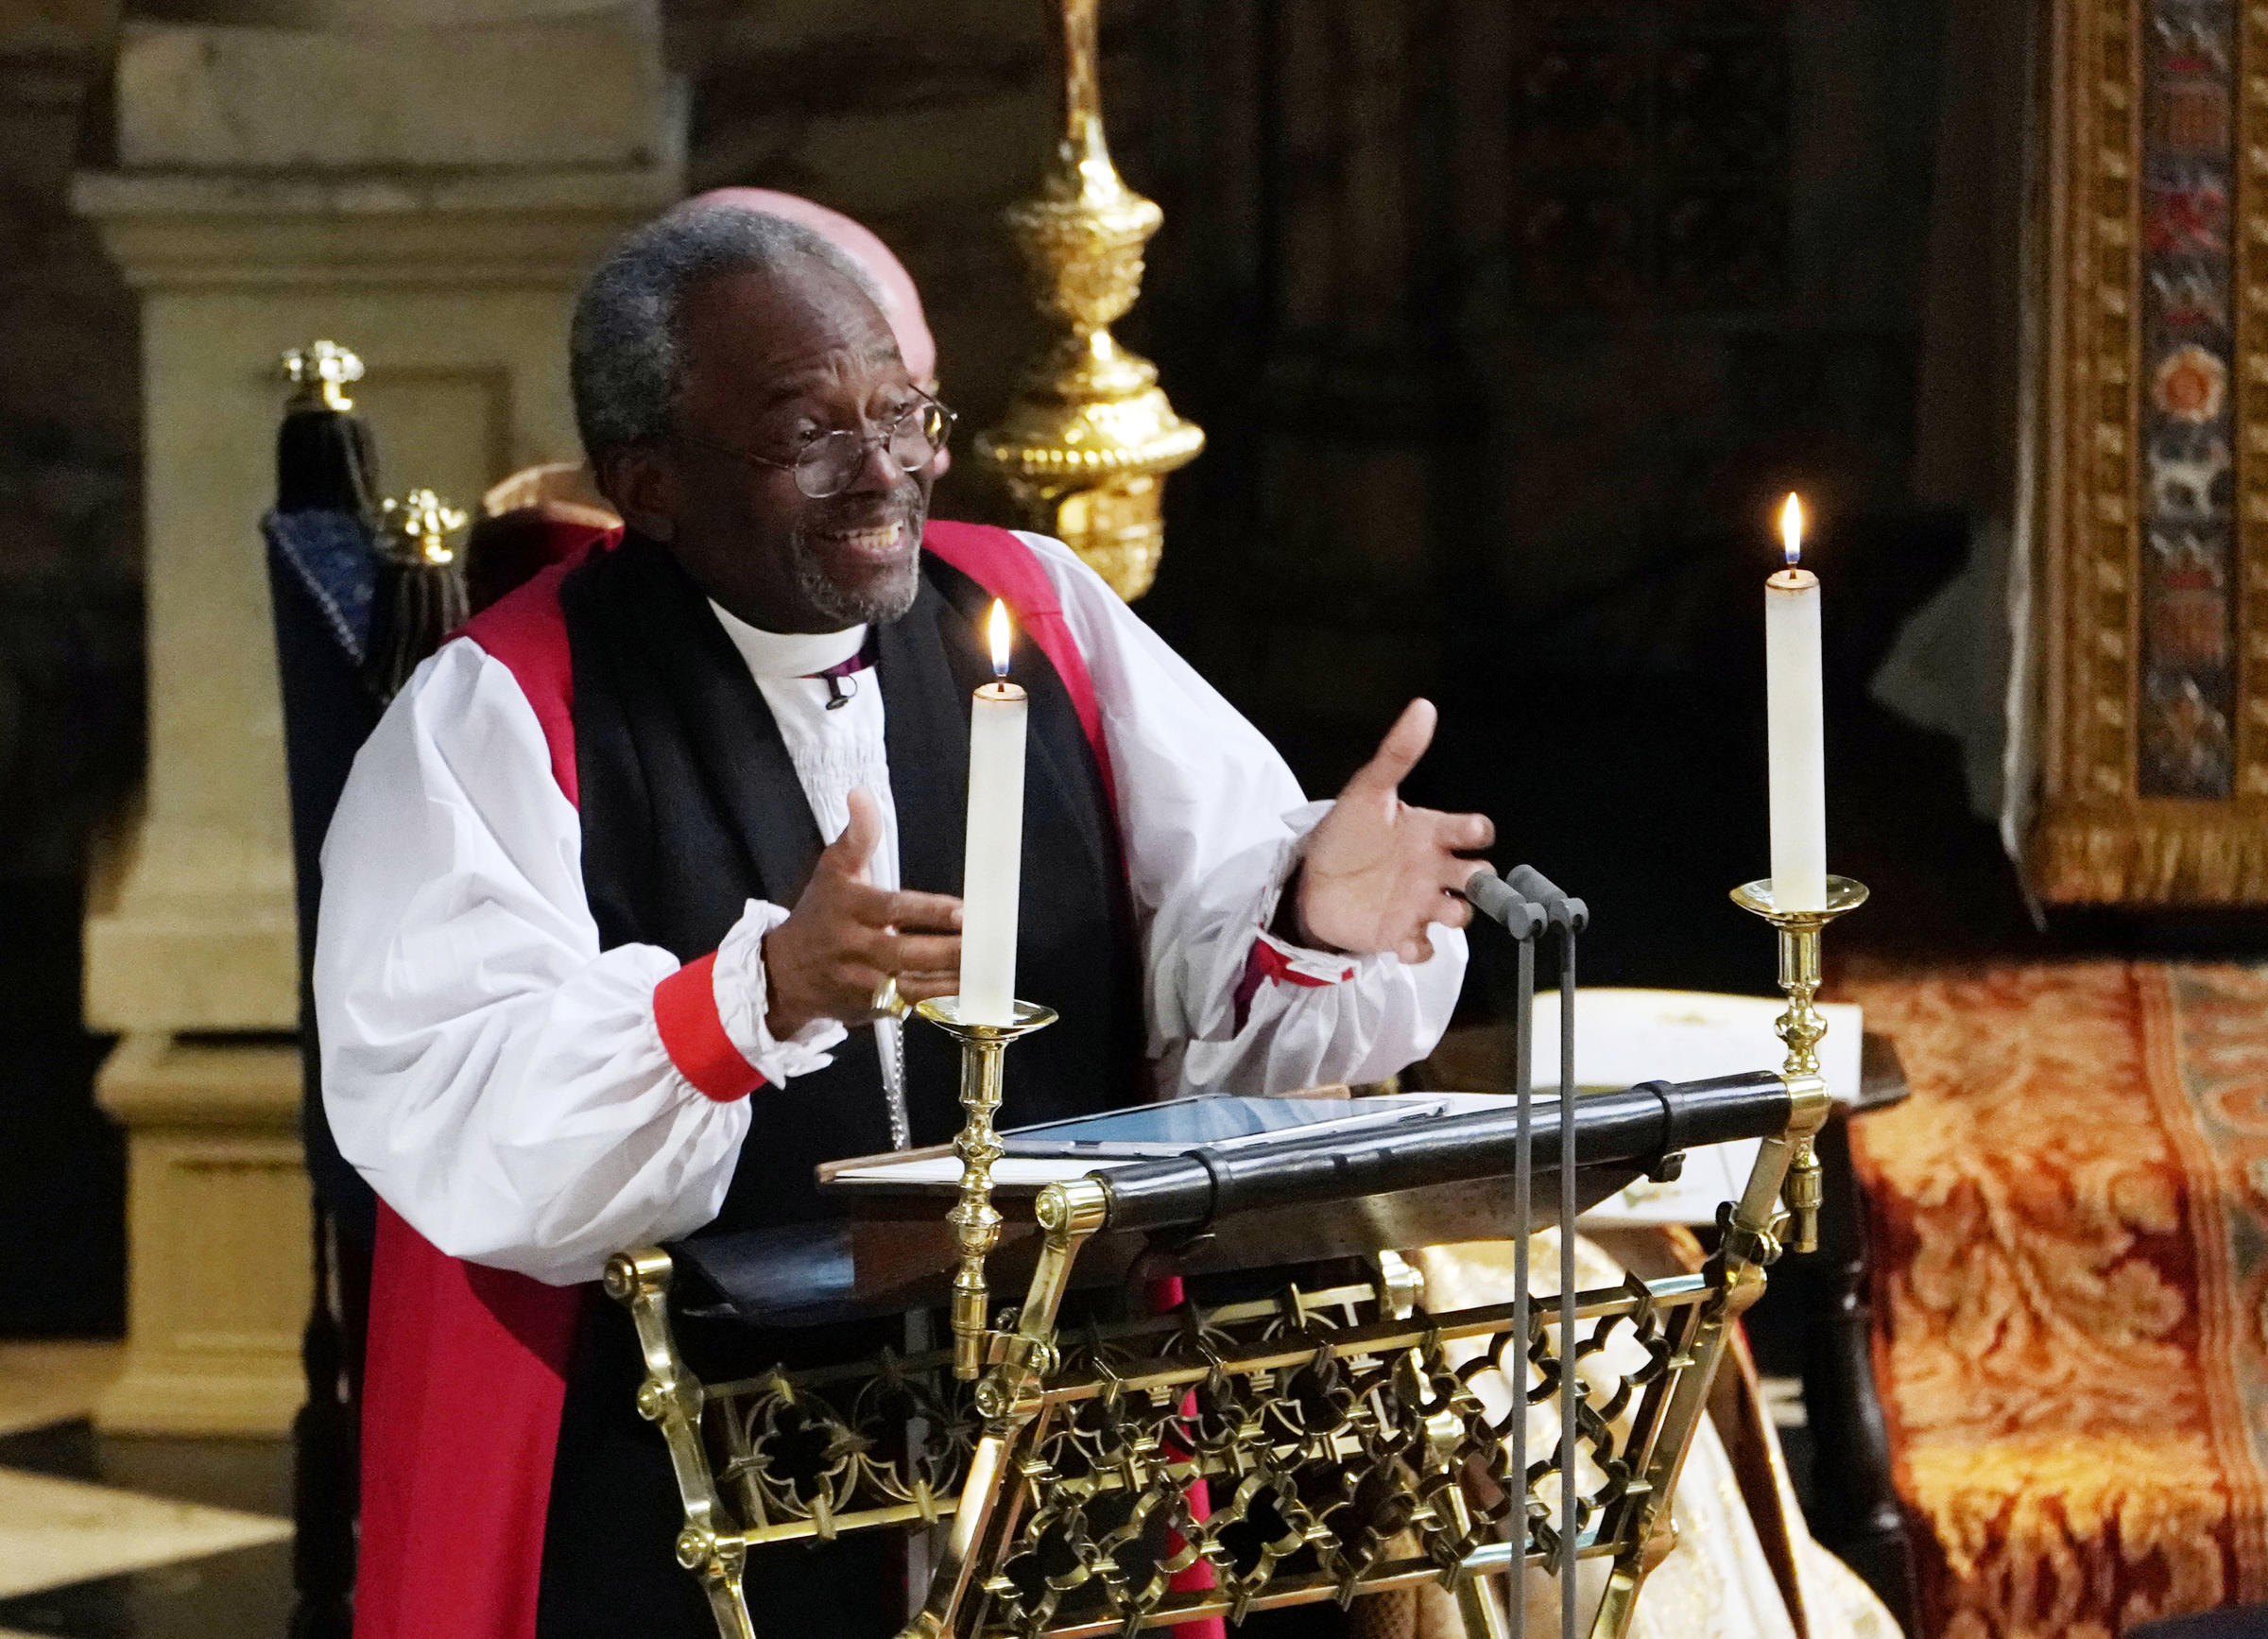 Royal Wedding Was Filled With Symbolism Of African American History